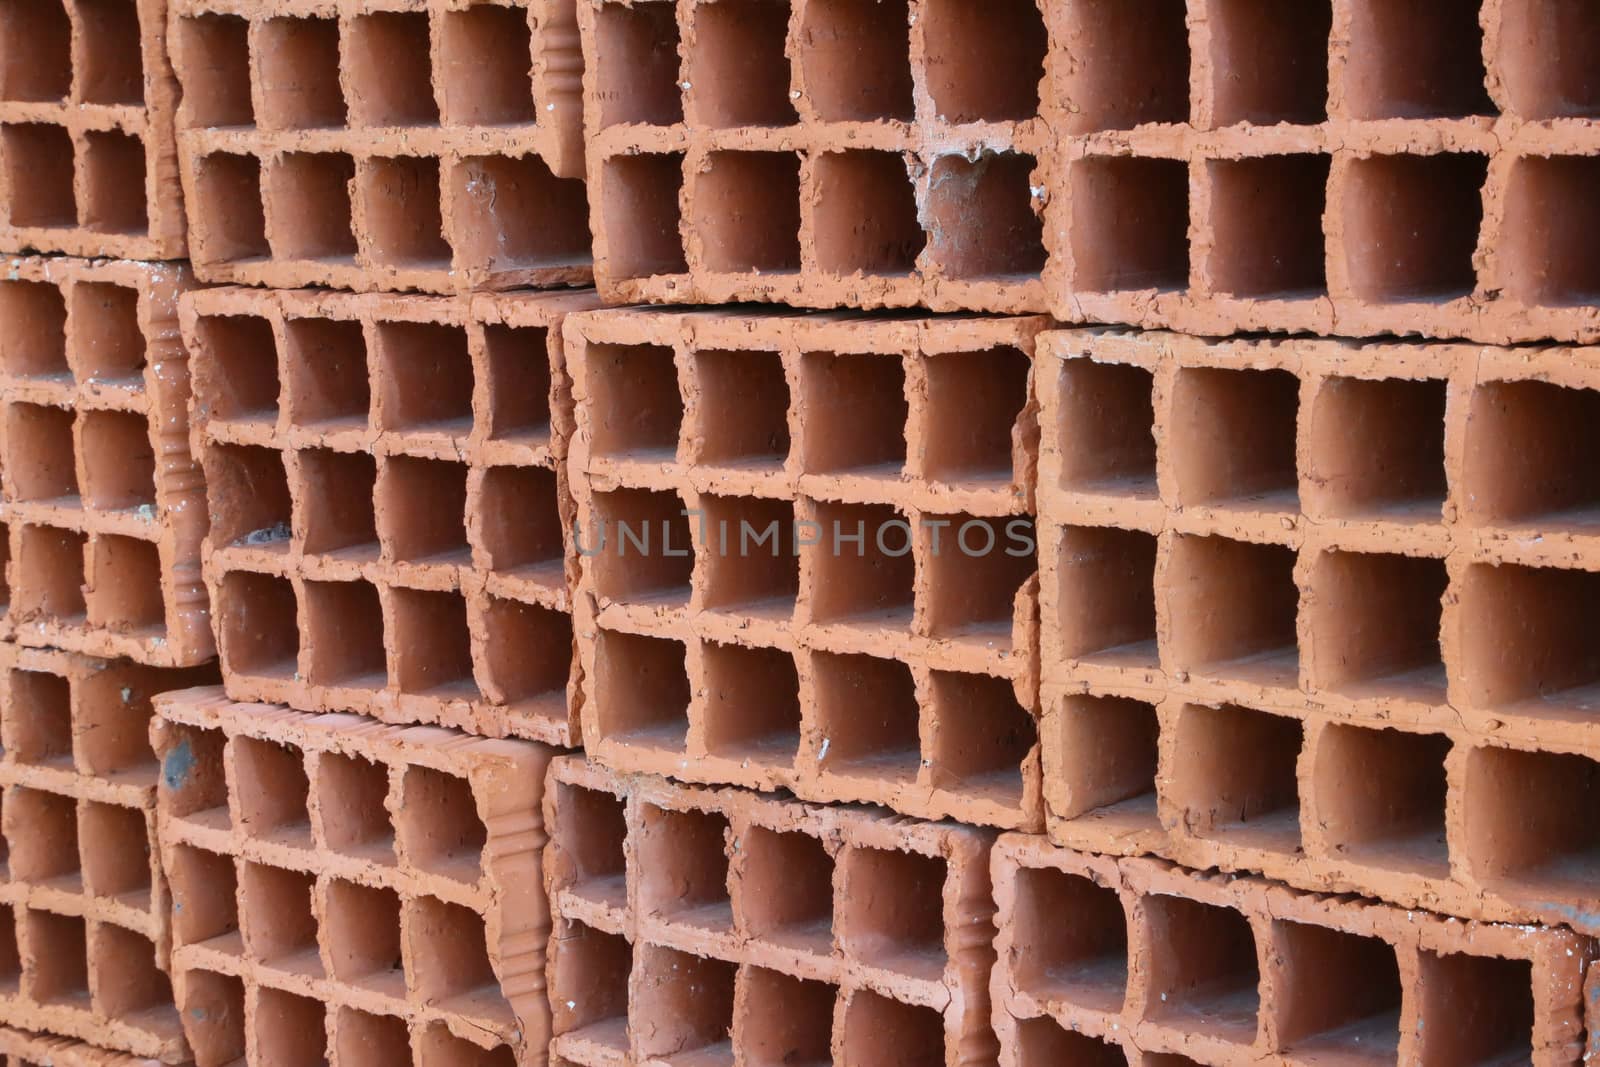 A row of hollow red clay bricks - background